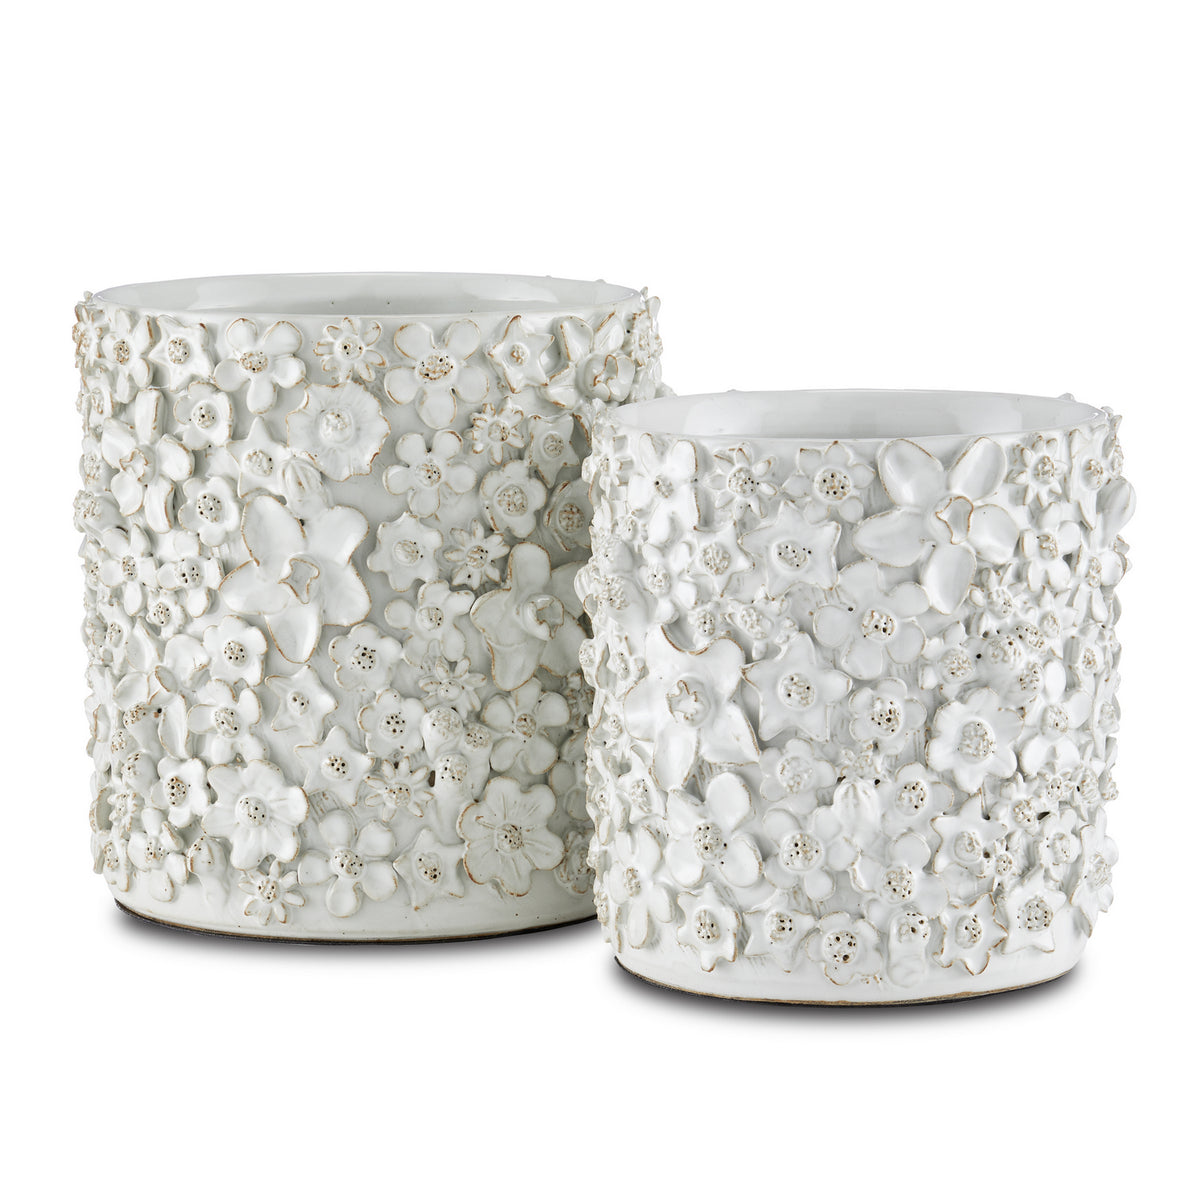 Currey and Company Cachepot from the Jessamine collection in White finish